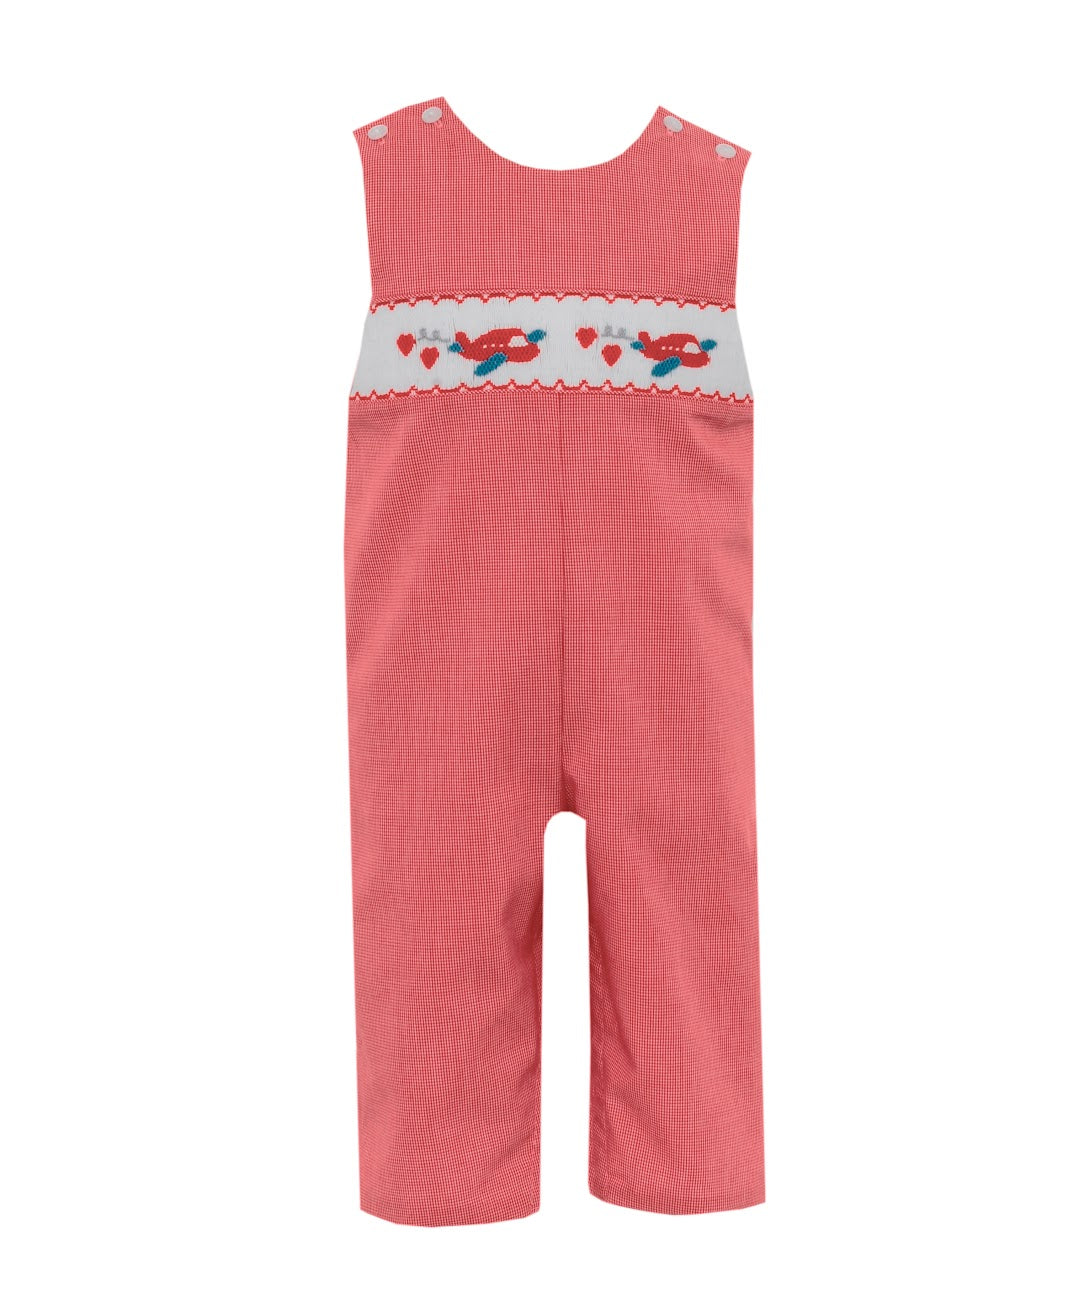 Heart Airplane Smocked Longall